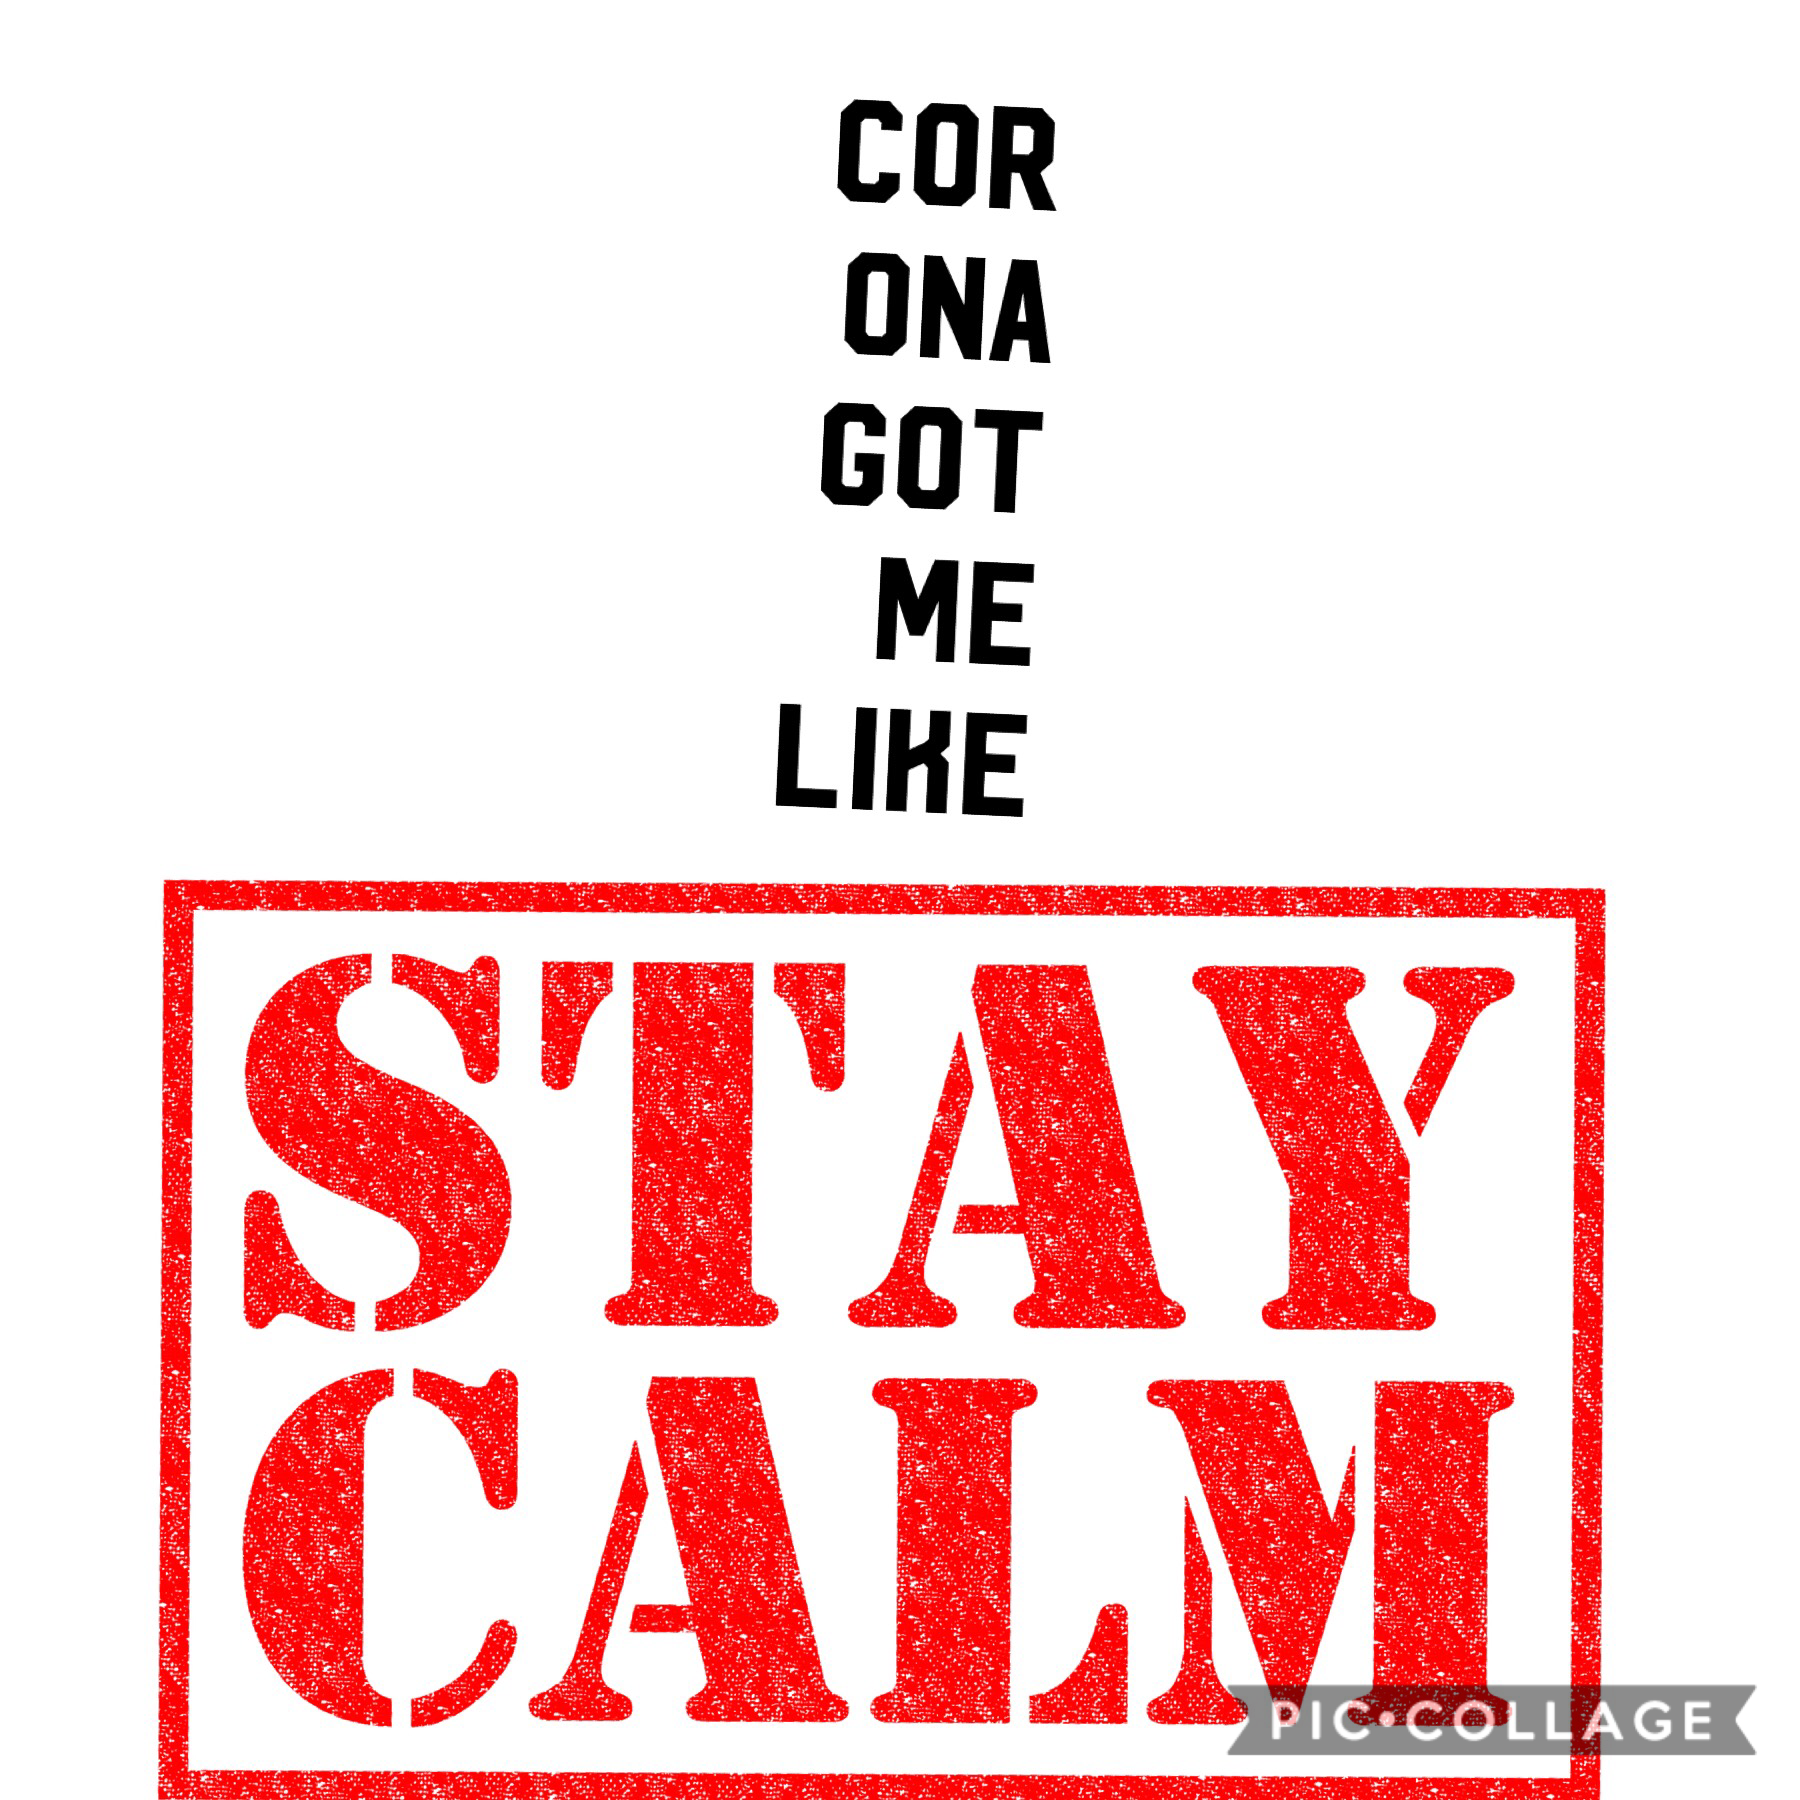 Stay calm even through this tough time! We will make it through! Trust me we just gotta stay calm and don’t stress